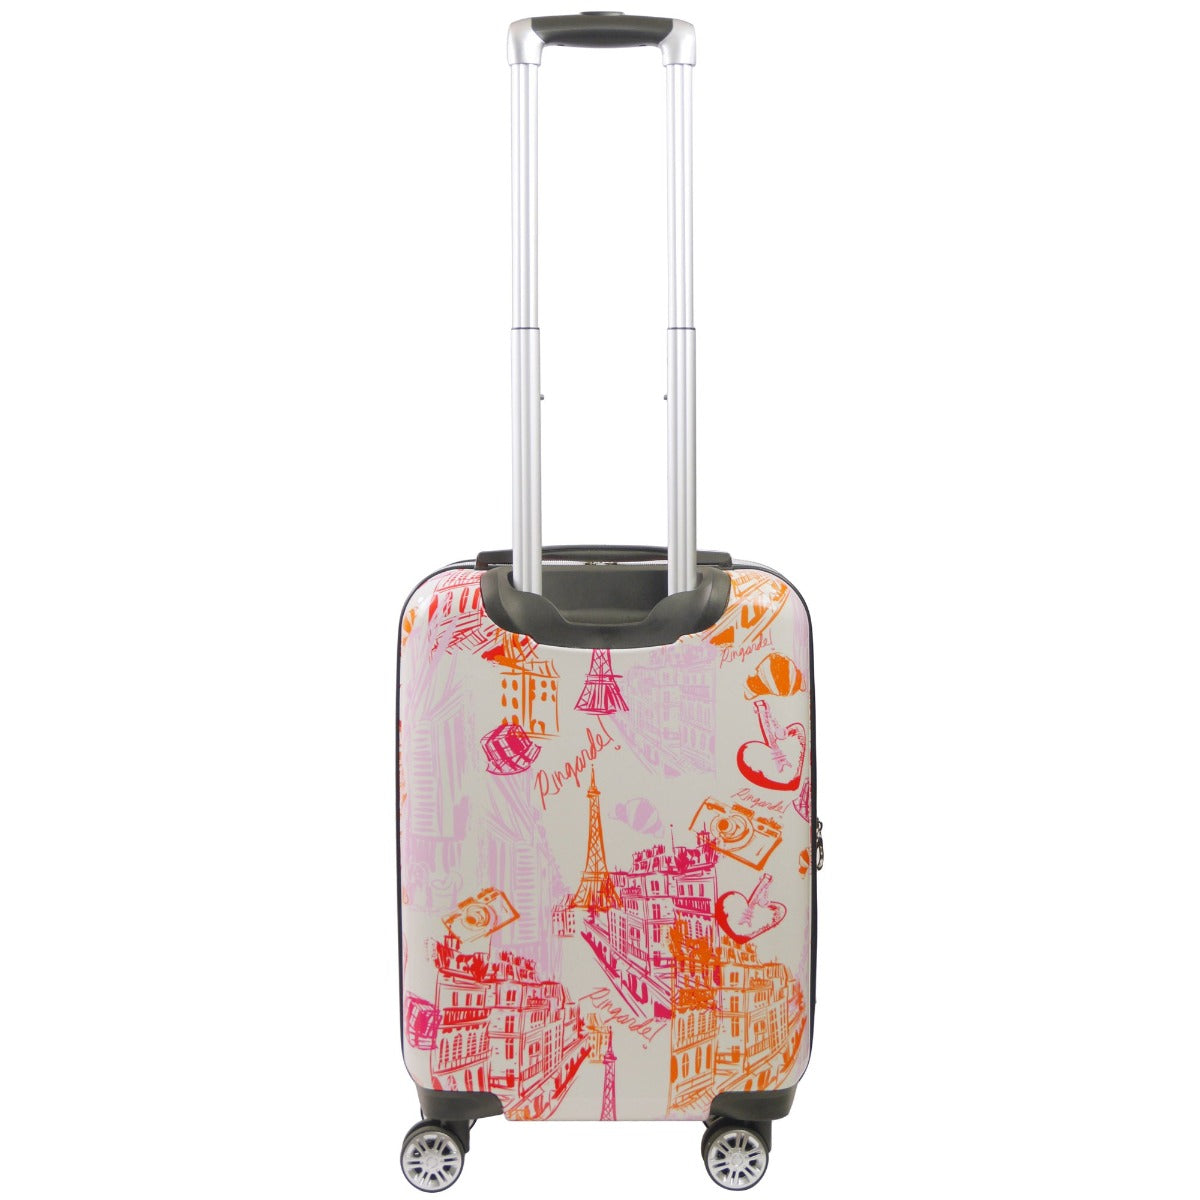 Ful Emily in Paris 21.5 inch hardside expandable luggage - best hard shell carry on suitcase